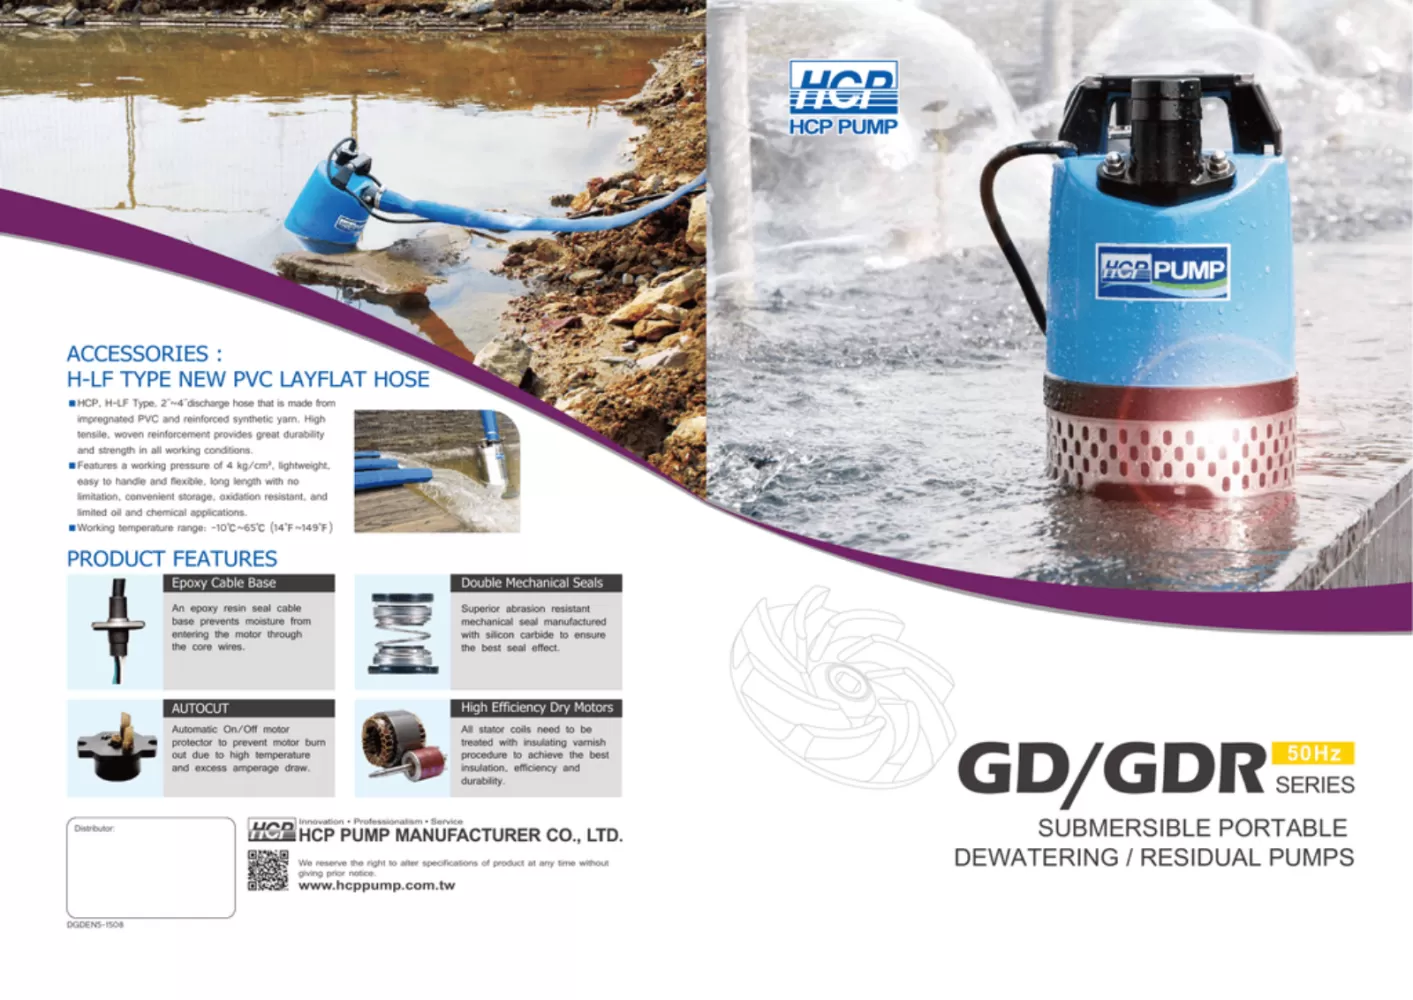 HCP GDR400 SUBMERSIBLE PUMP -  DISCHARGE 2", 230V, 400W, MAX HEAD 11M, FLOW RATE 200L/MIN, 10.5KG